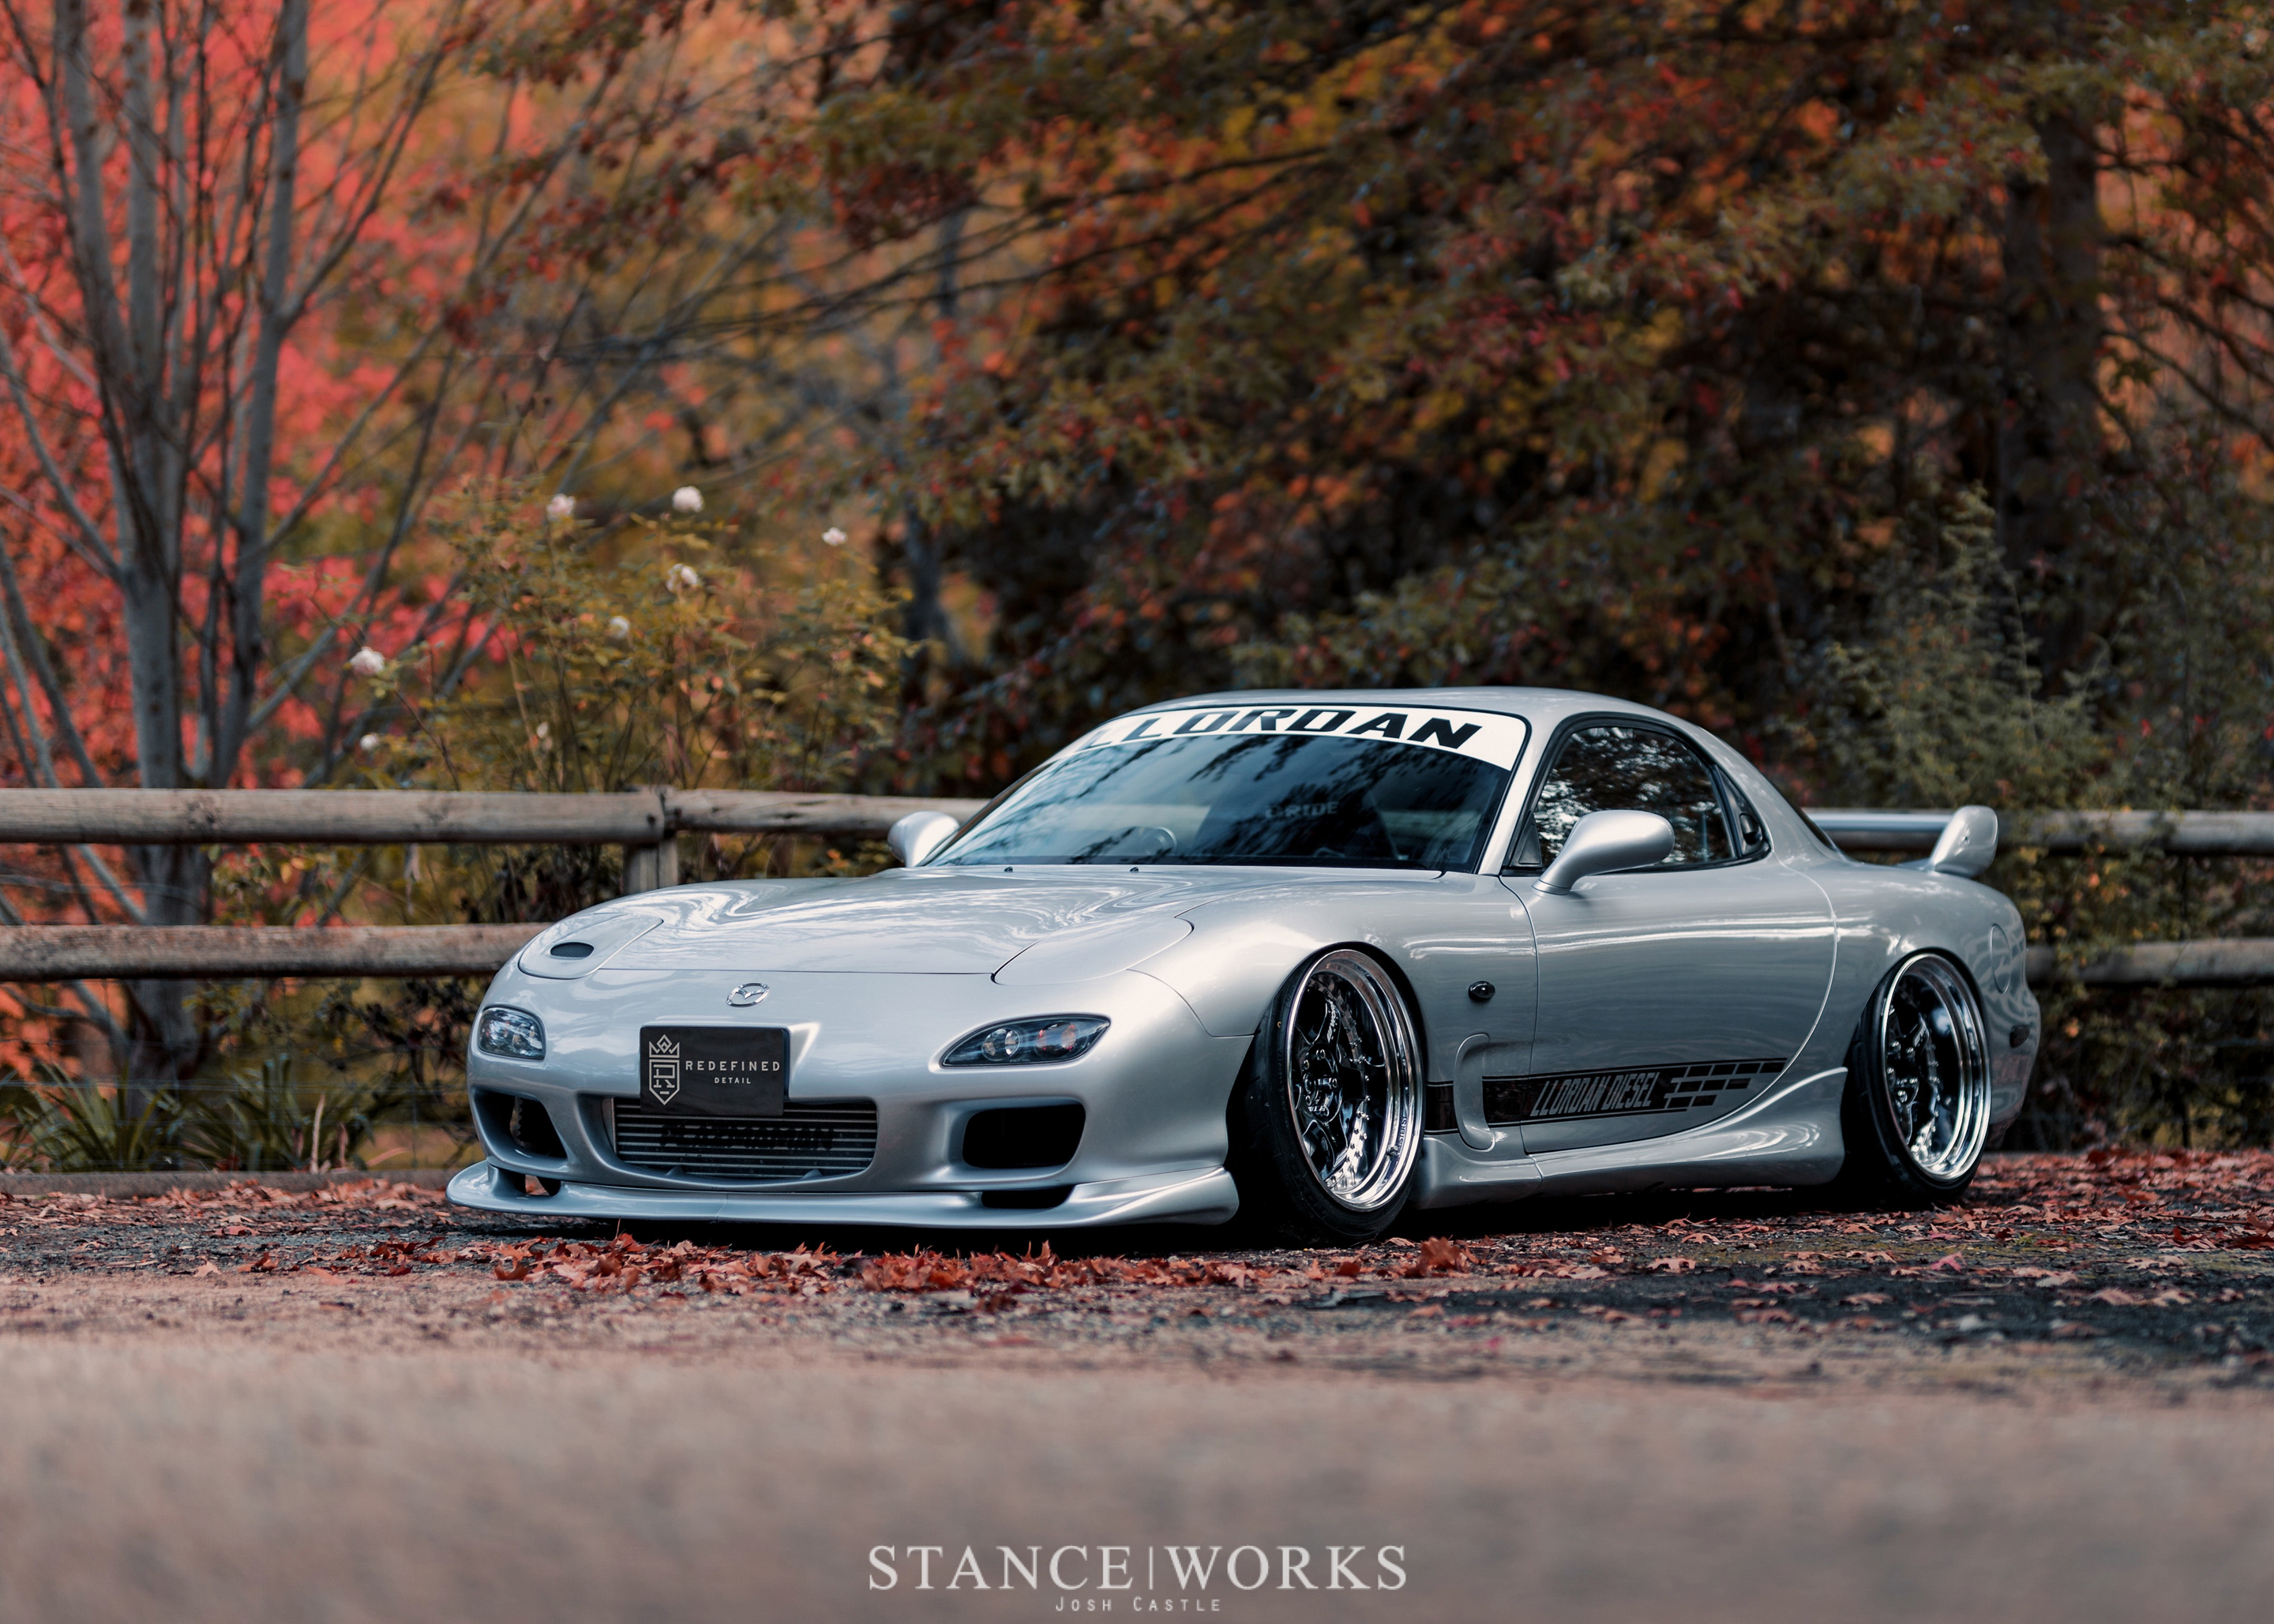 As for why the RX7 has developed a cult following, it's easy to unders...